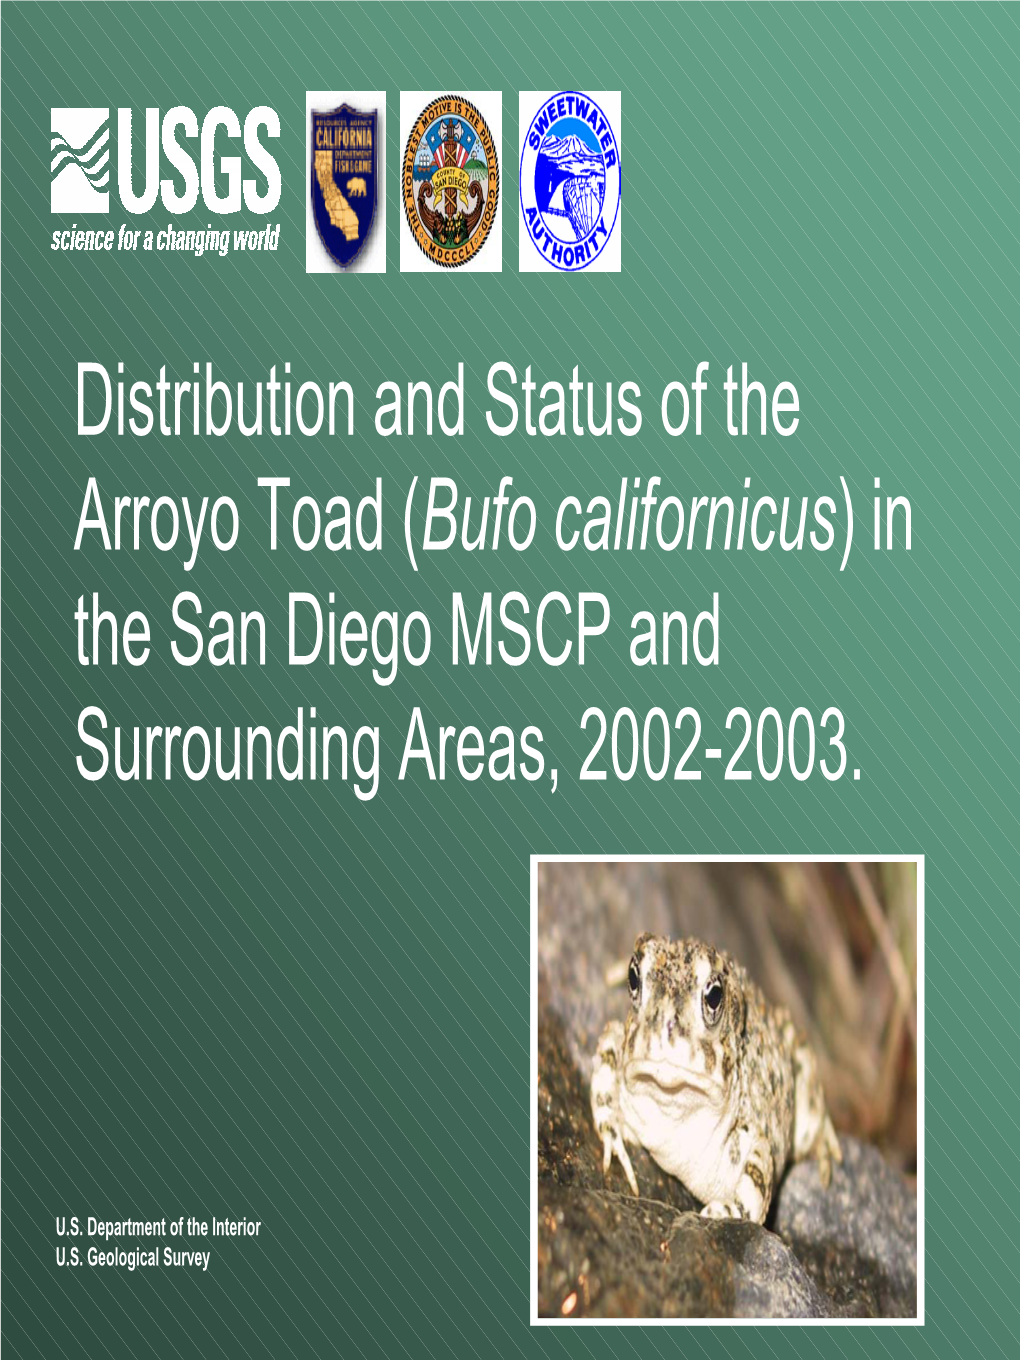 Distribution and Status of the Arroyo Toad (Bufo Californicus) in the San Diego MSCP and Surrounding Areas, 2002-2003